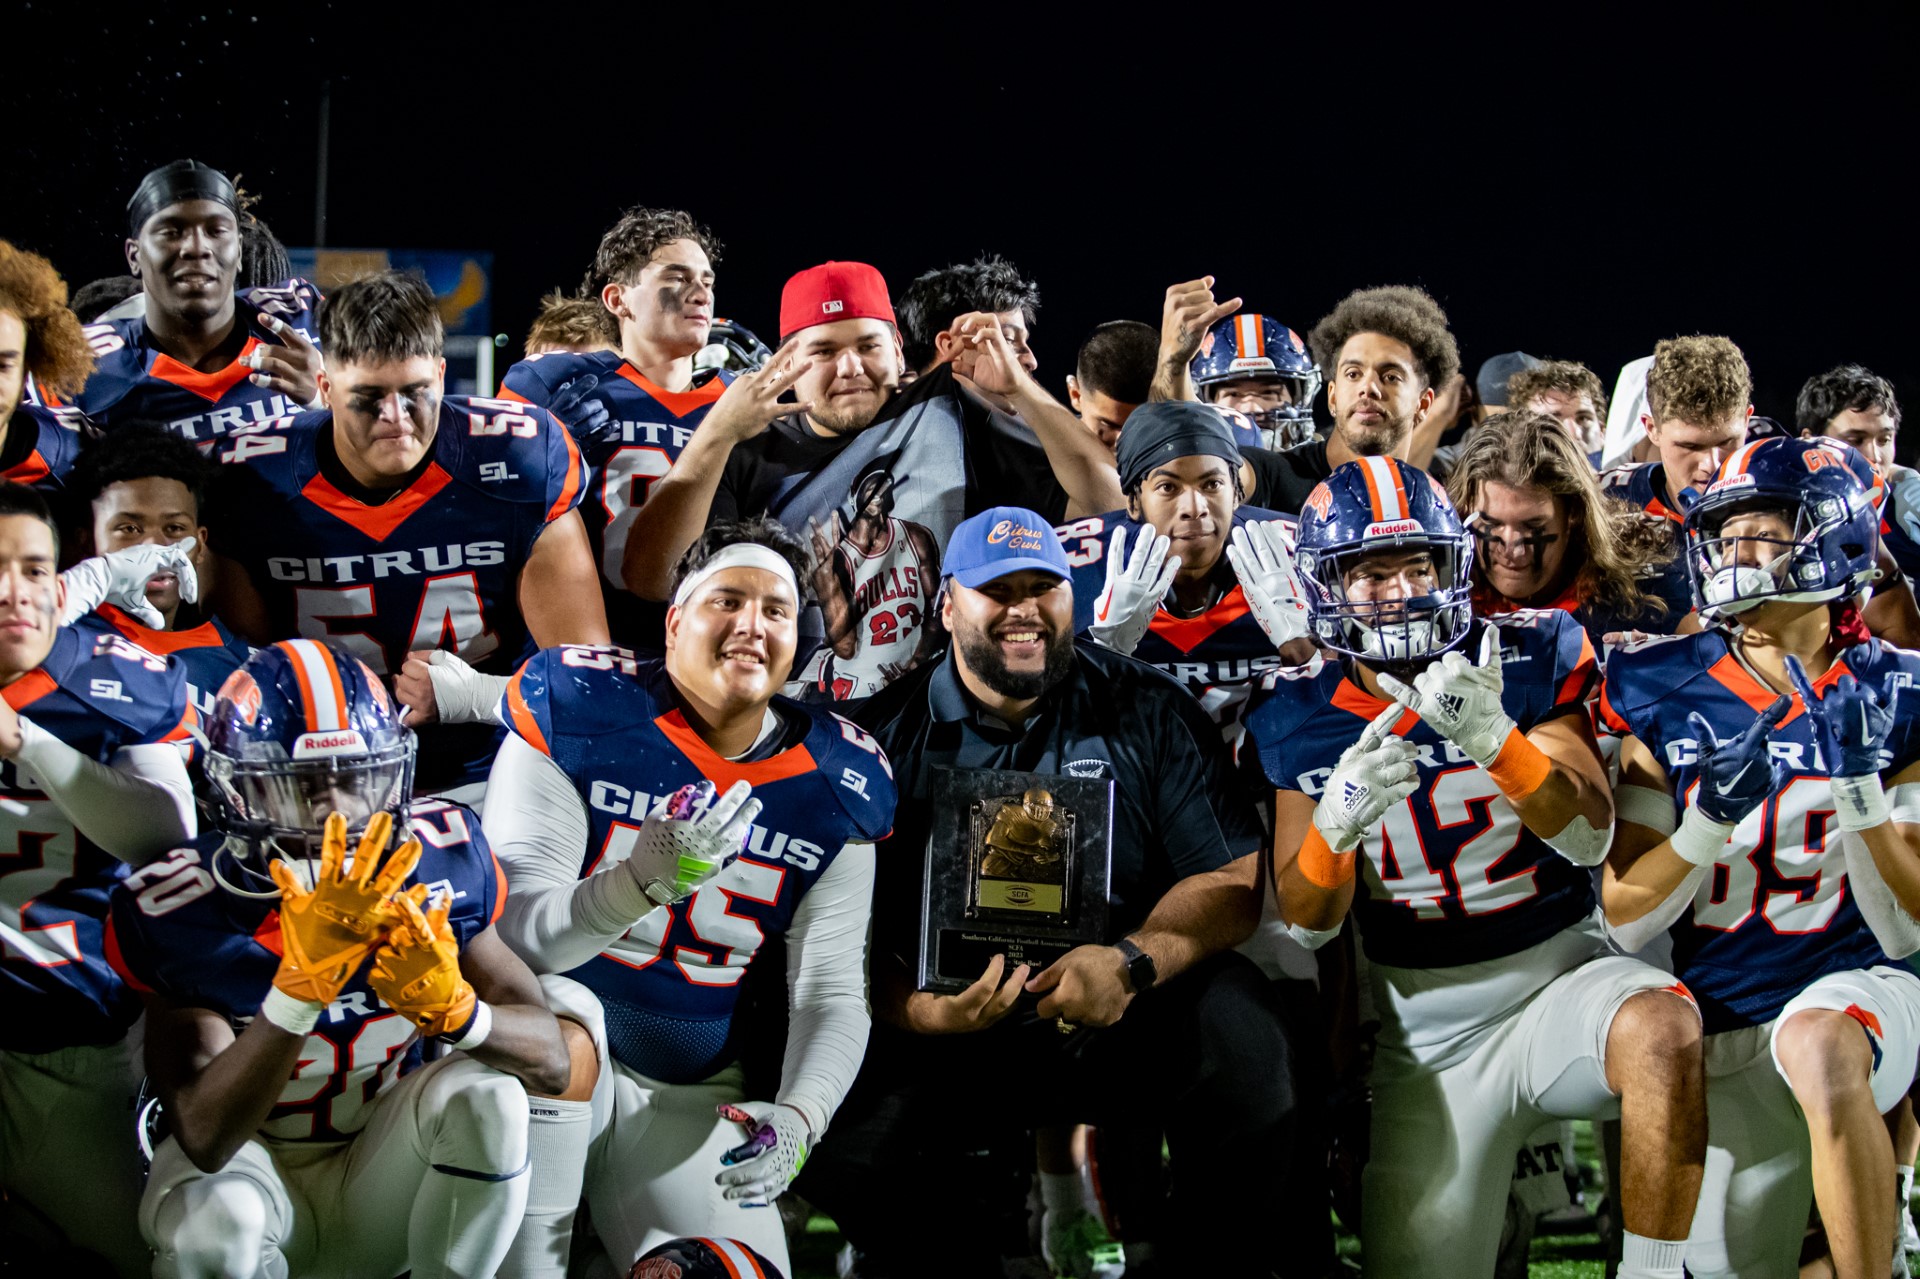 Citrus College defeats Canyons to win the Western State Bowl